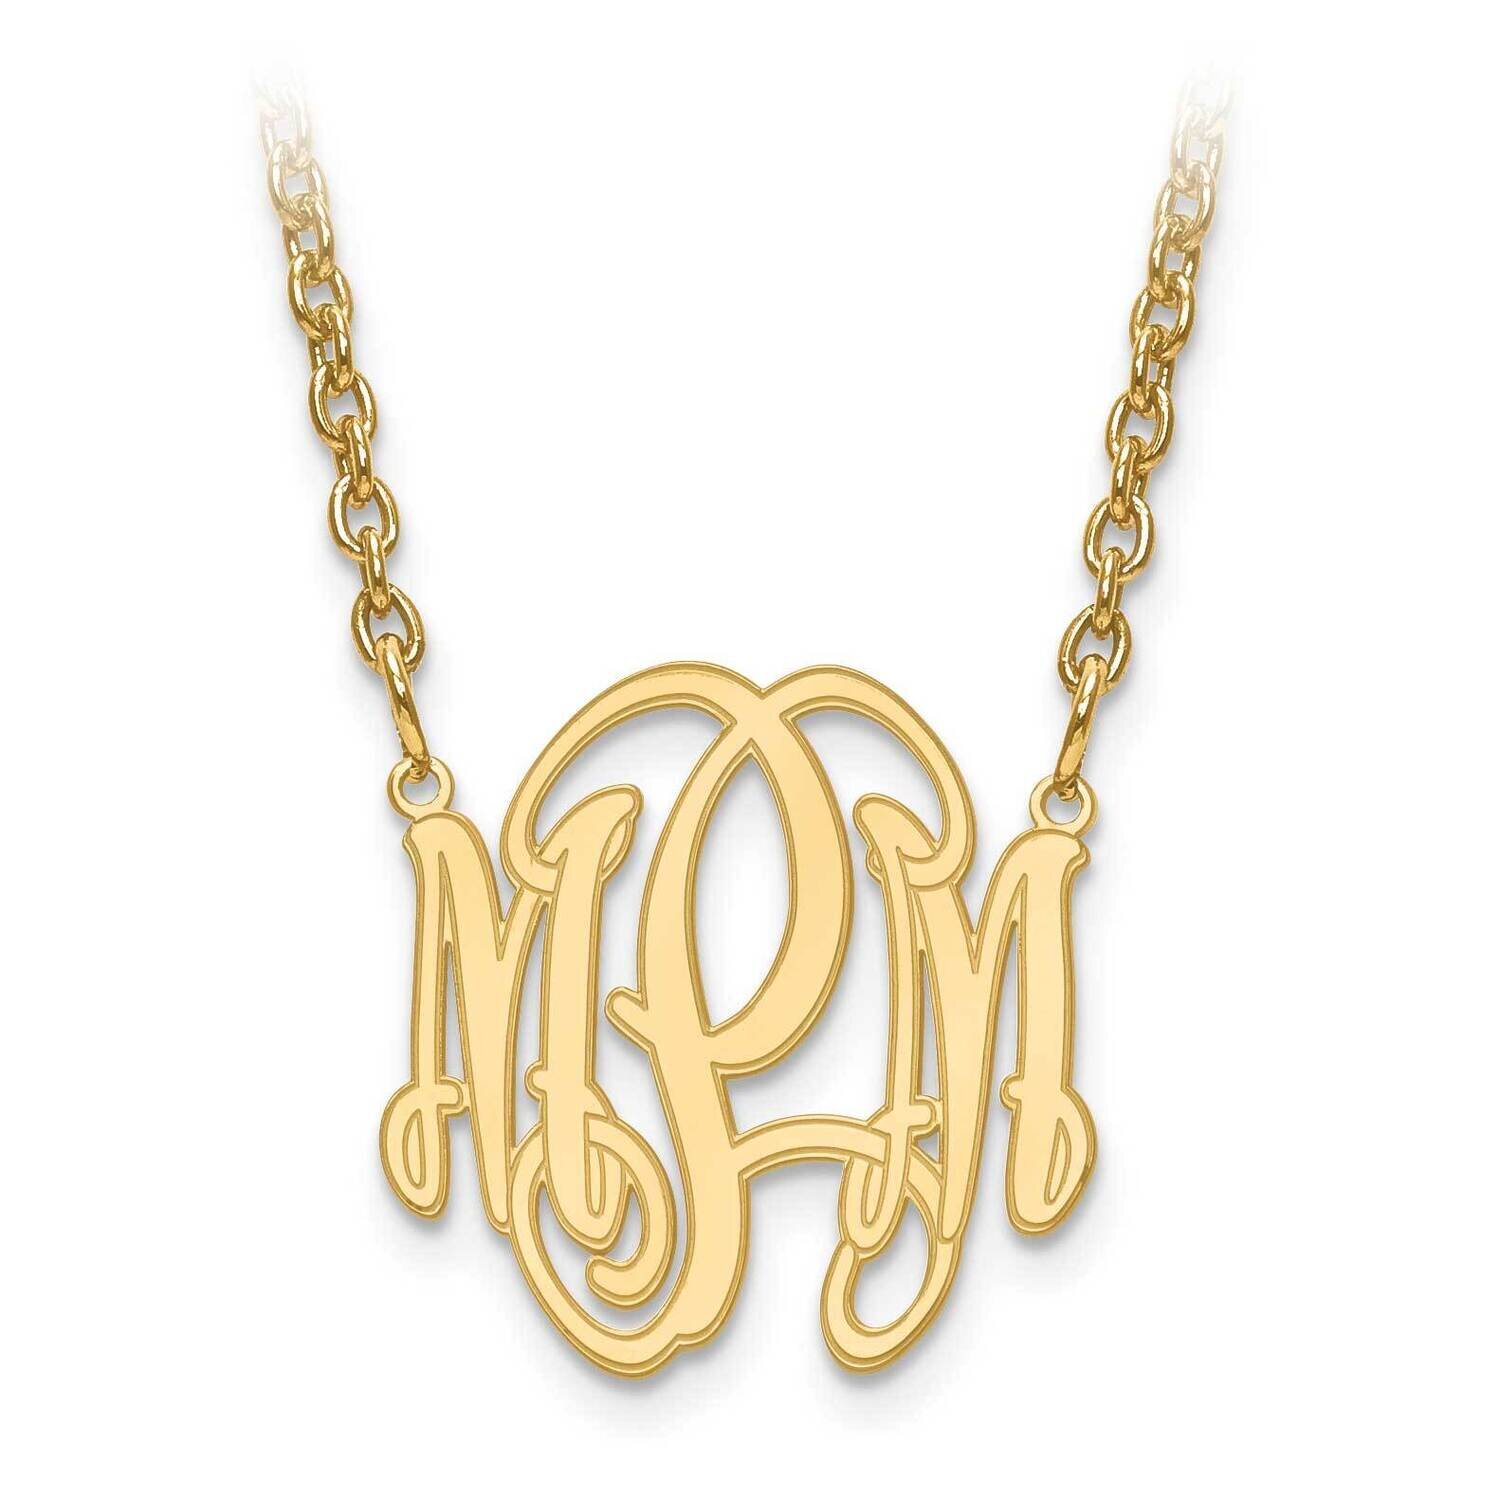 Circular Etched Outline Monogram Plate with Chain Gold-plated Silver XNA552GP